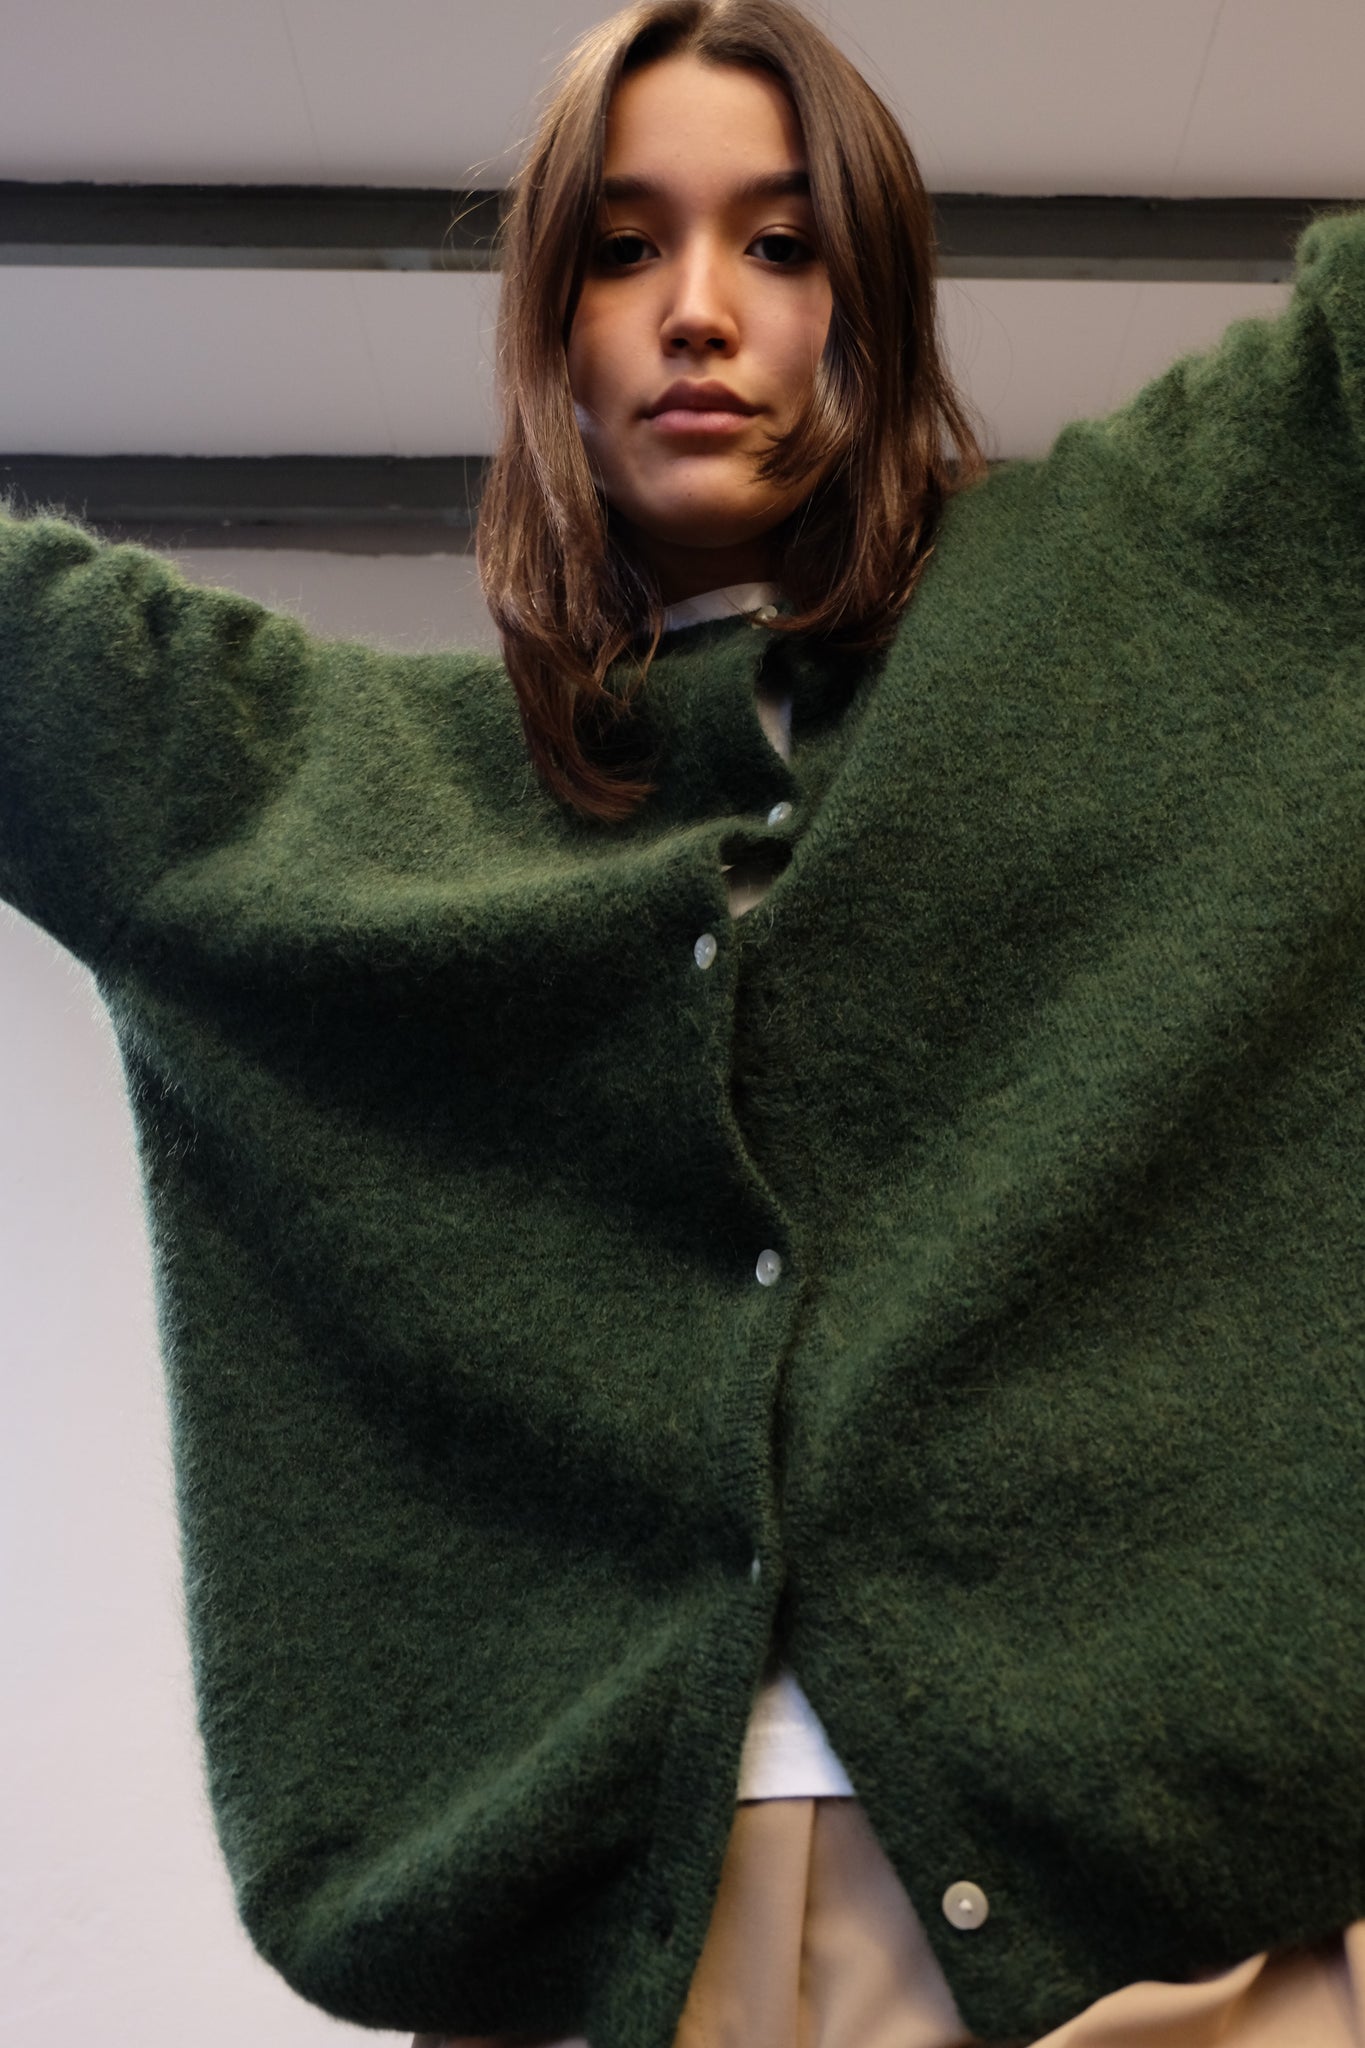 PEARL BUTTONED OVERSIZED CARDI IN FIR GREEN